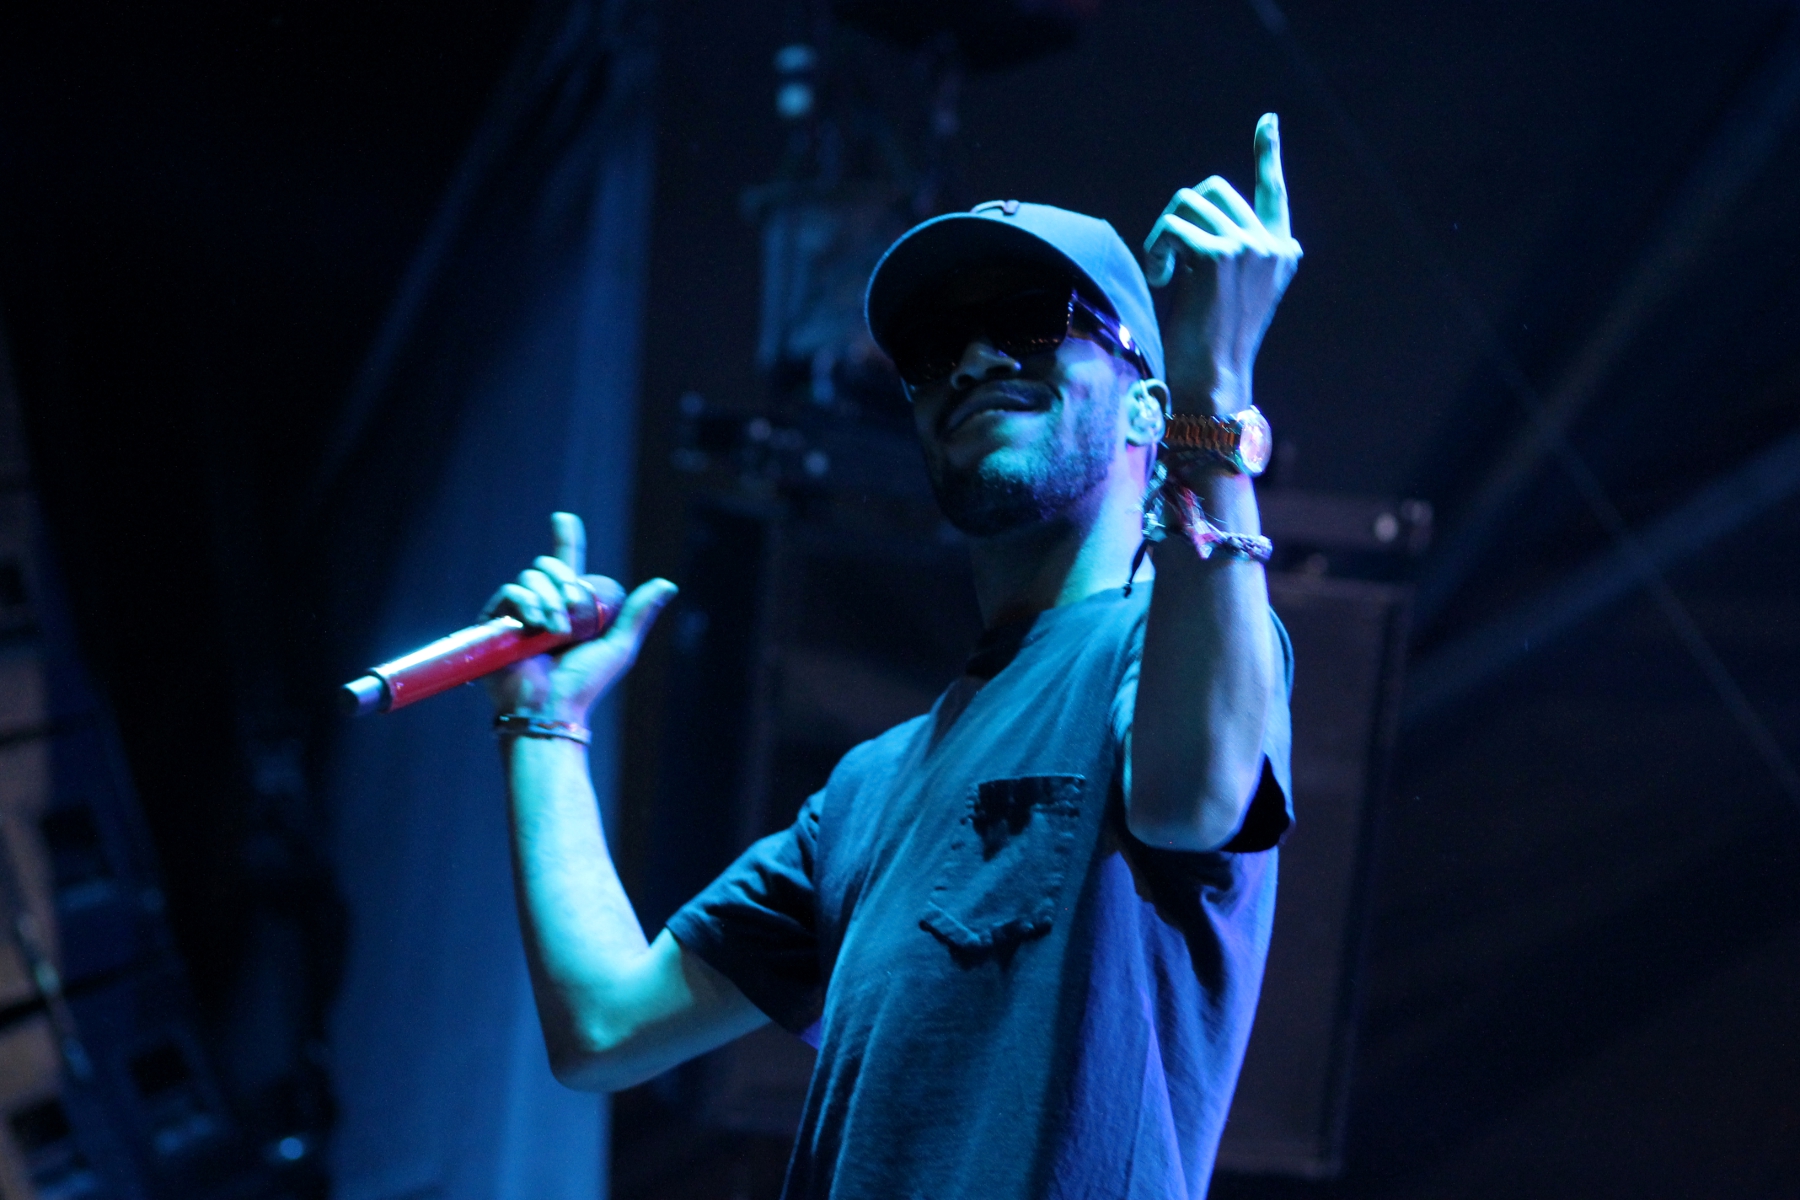 Kid Cudi Reveals Tracklist & Special Guests For New Album INSANO Featuring A$AP Rocky, Travis Scott, Pharrell Williams & More